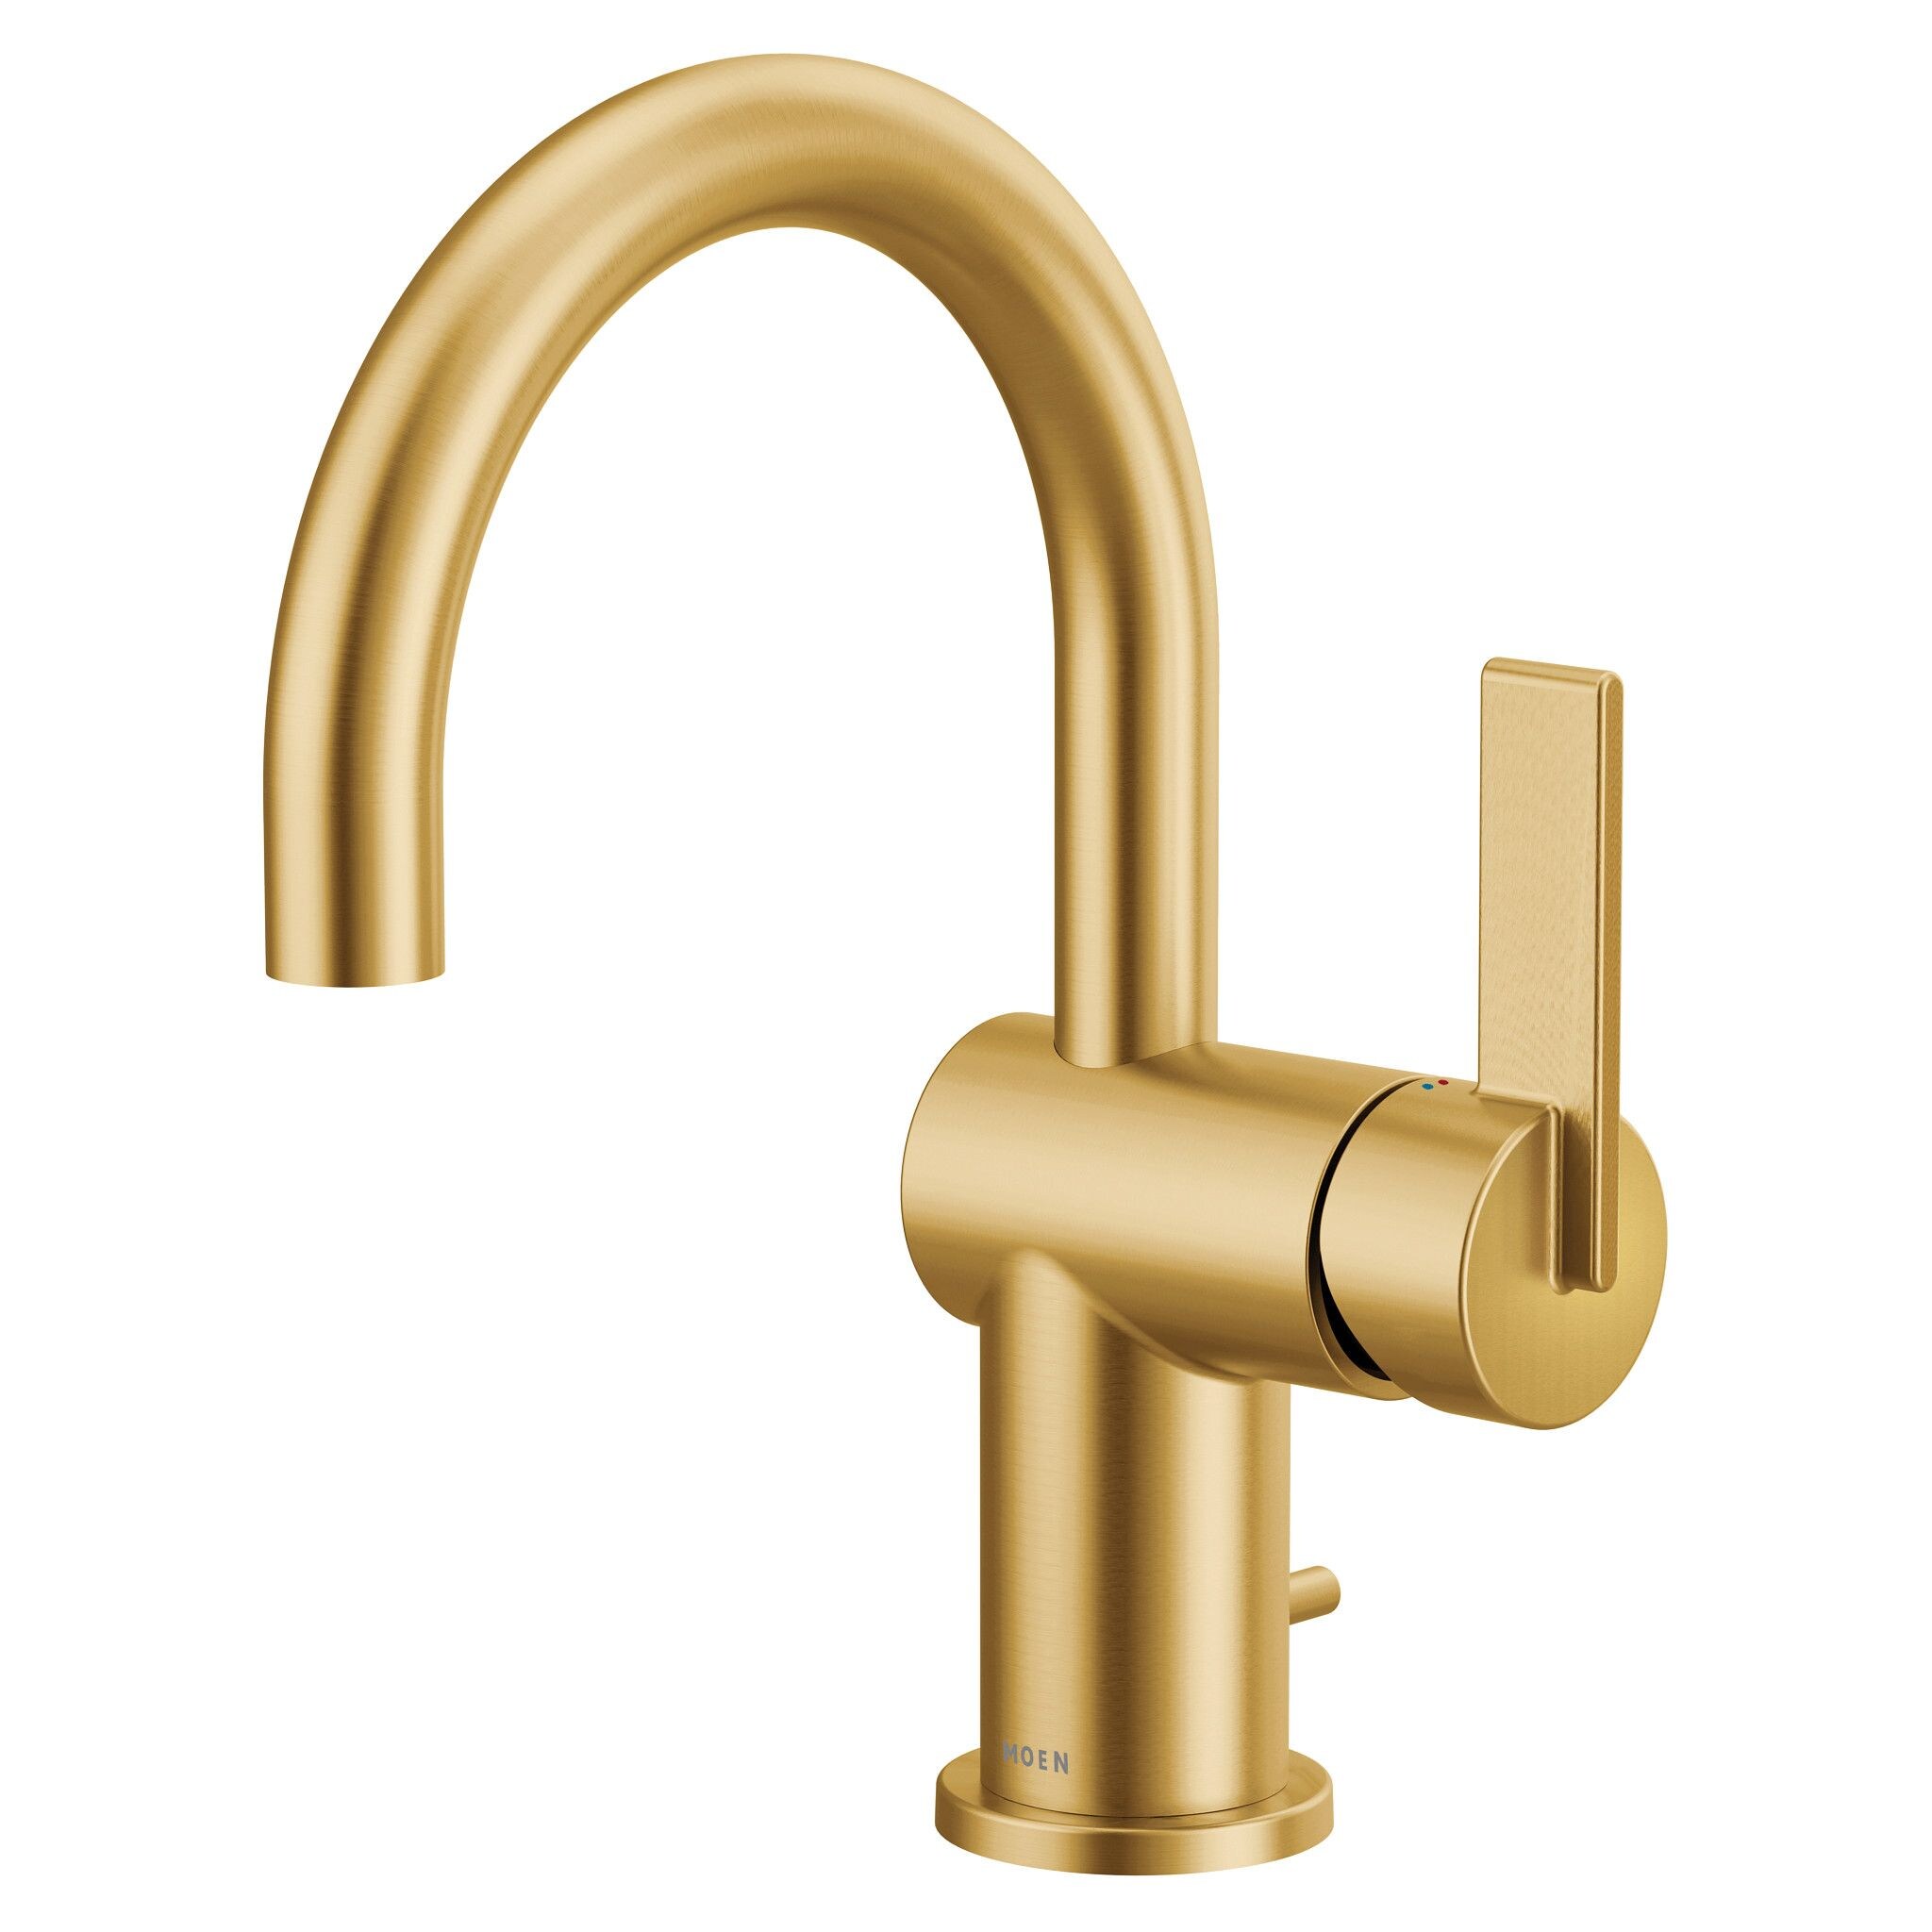 Moen Cia Brushed Gold 1-handle Single Hole High-arc Bathroom Sink Faucet  with Drain with Deck Plate at